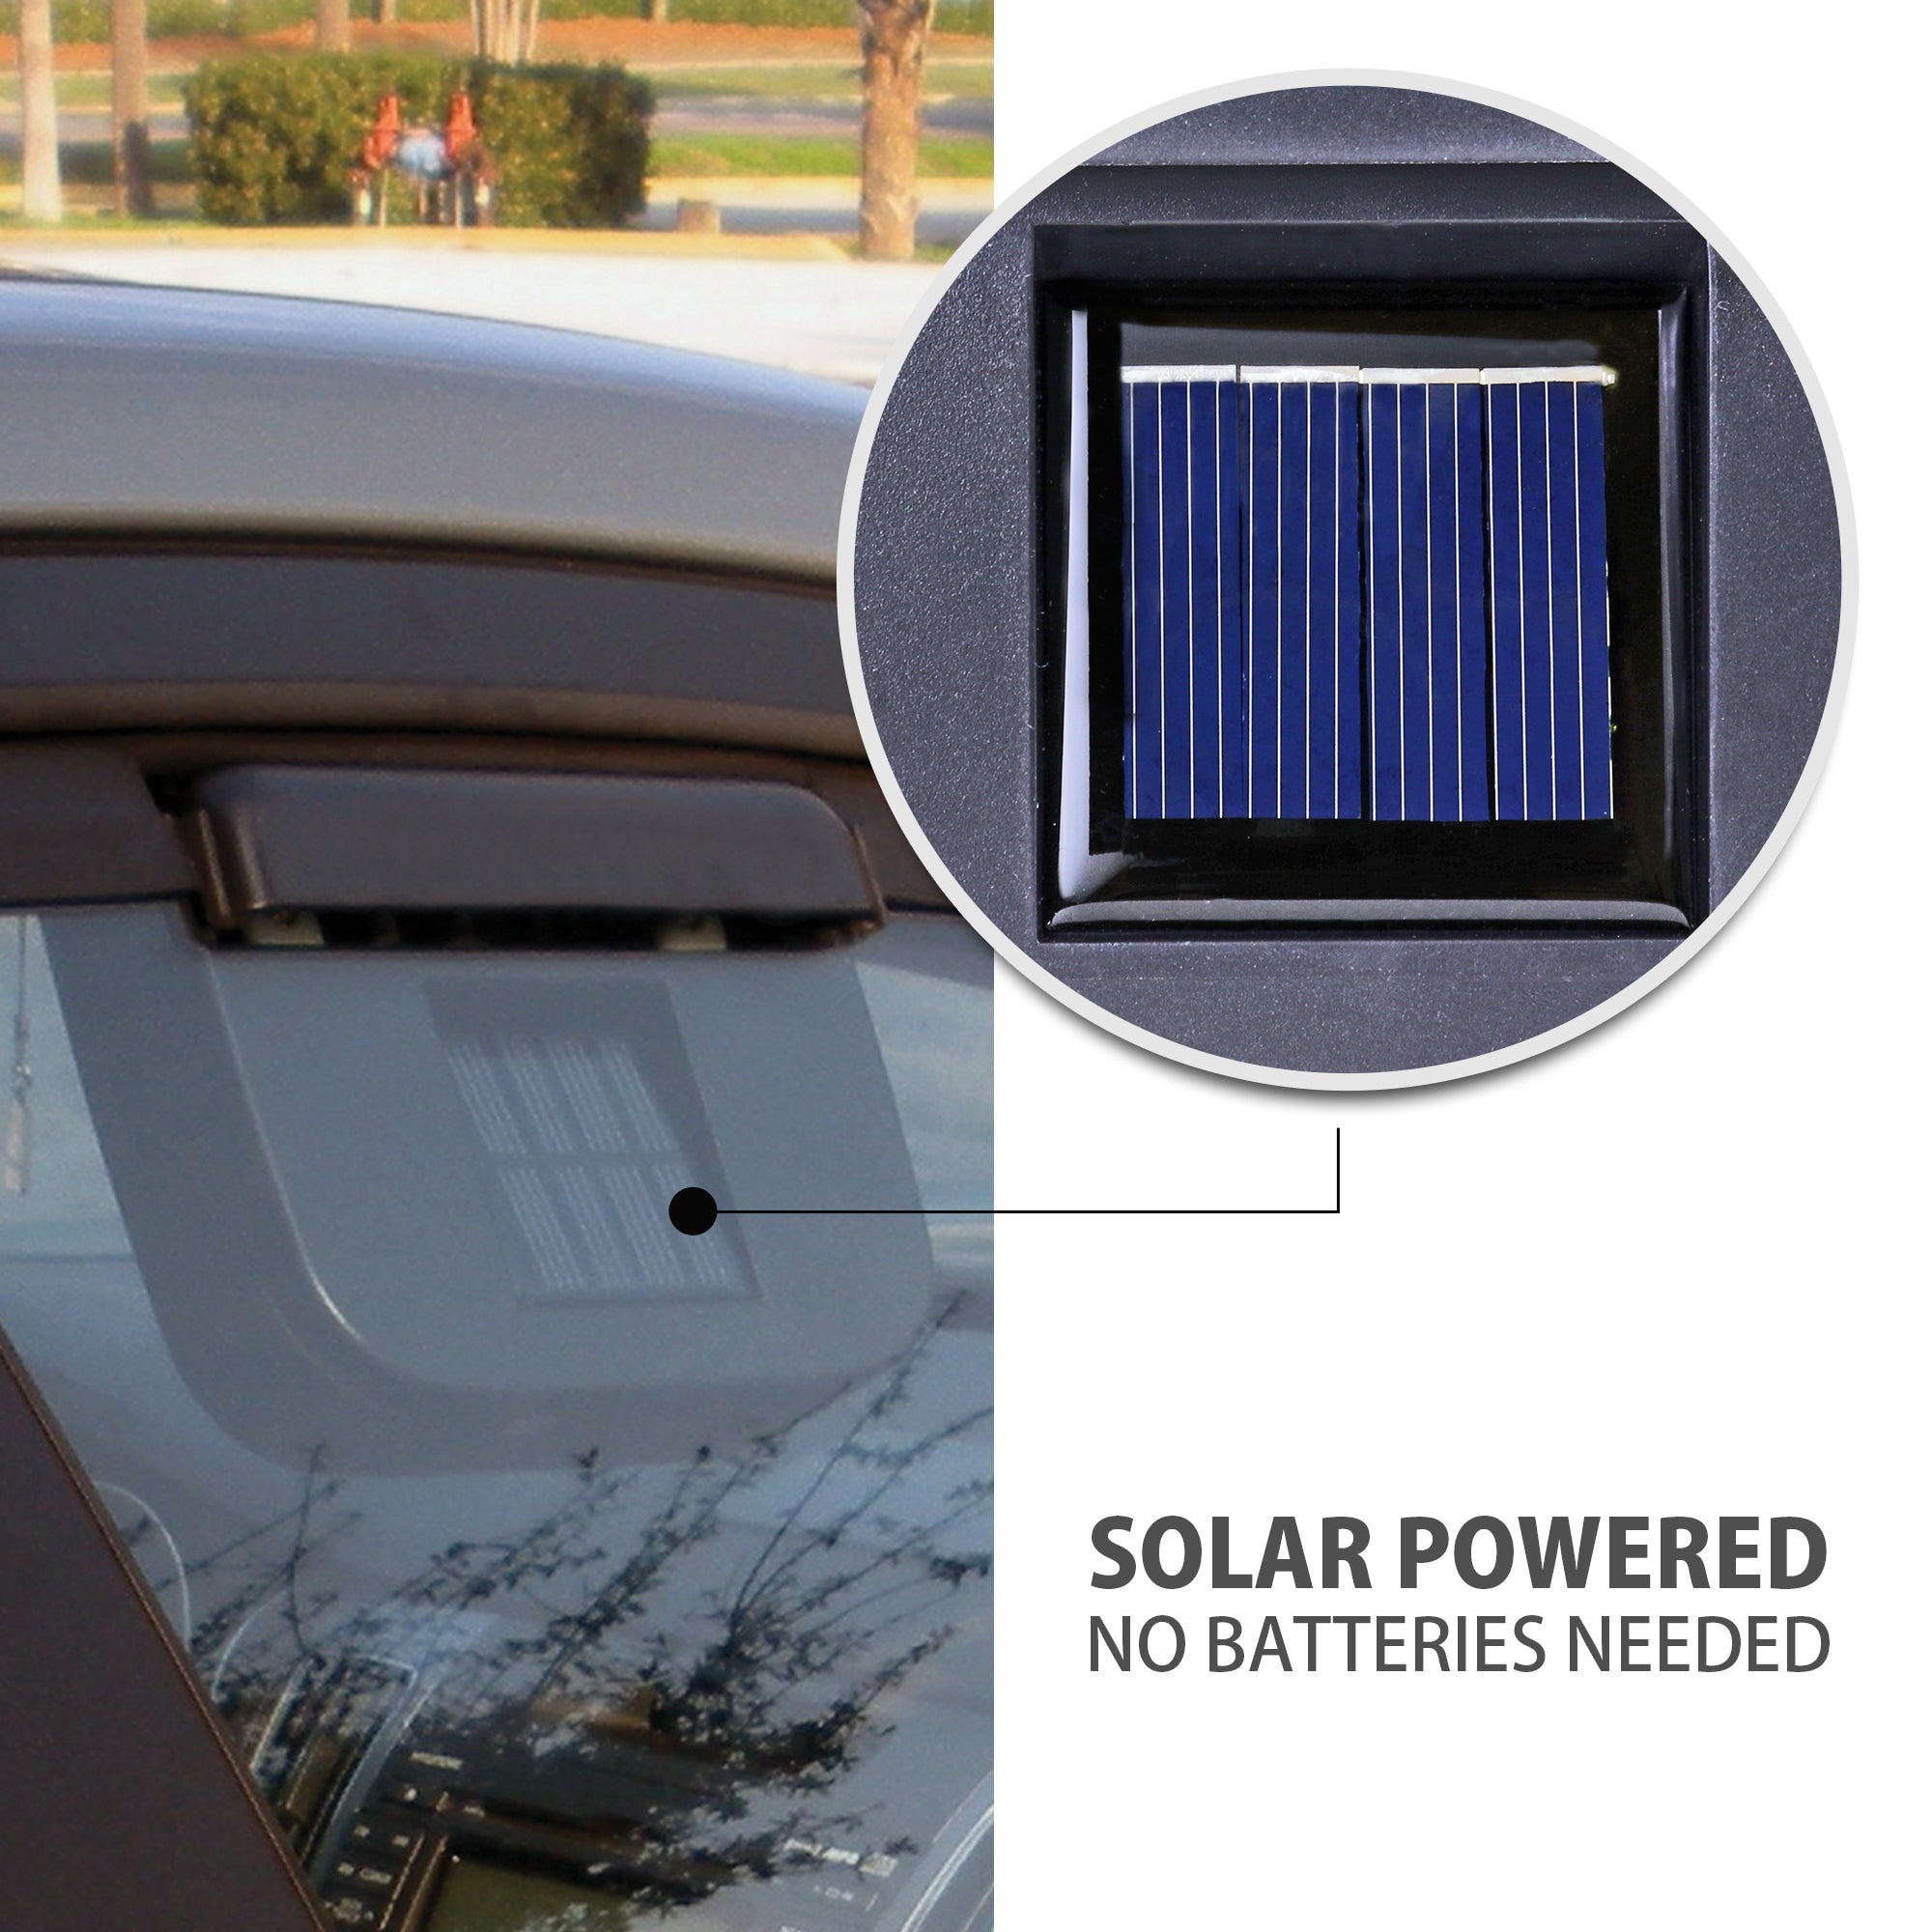 Lifestyle image of the AutoKool vehicle vent system mounted on a car window viewed from outside with an inset closeup of the solar panel. Text below reads, "Solar powered: no batteries needed"